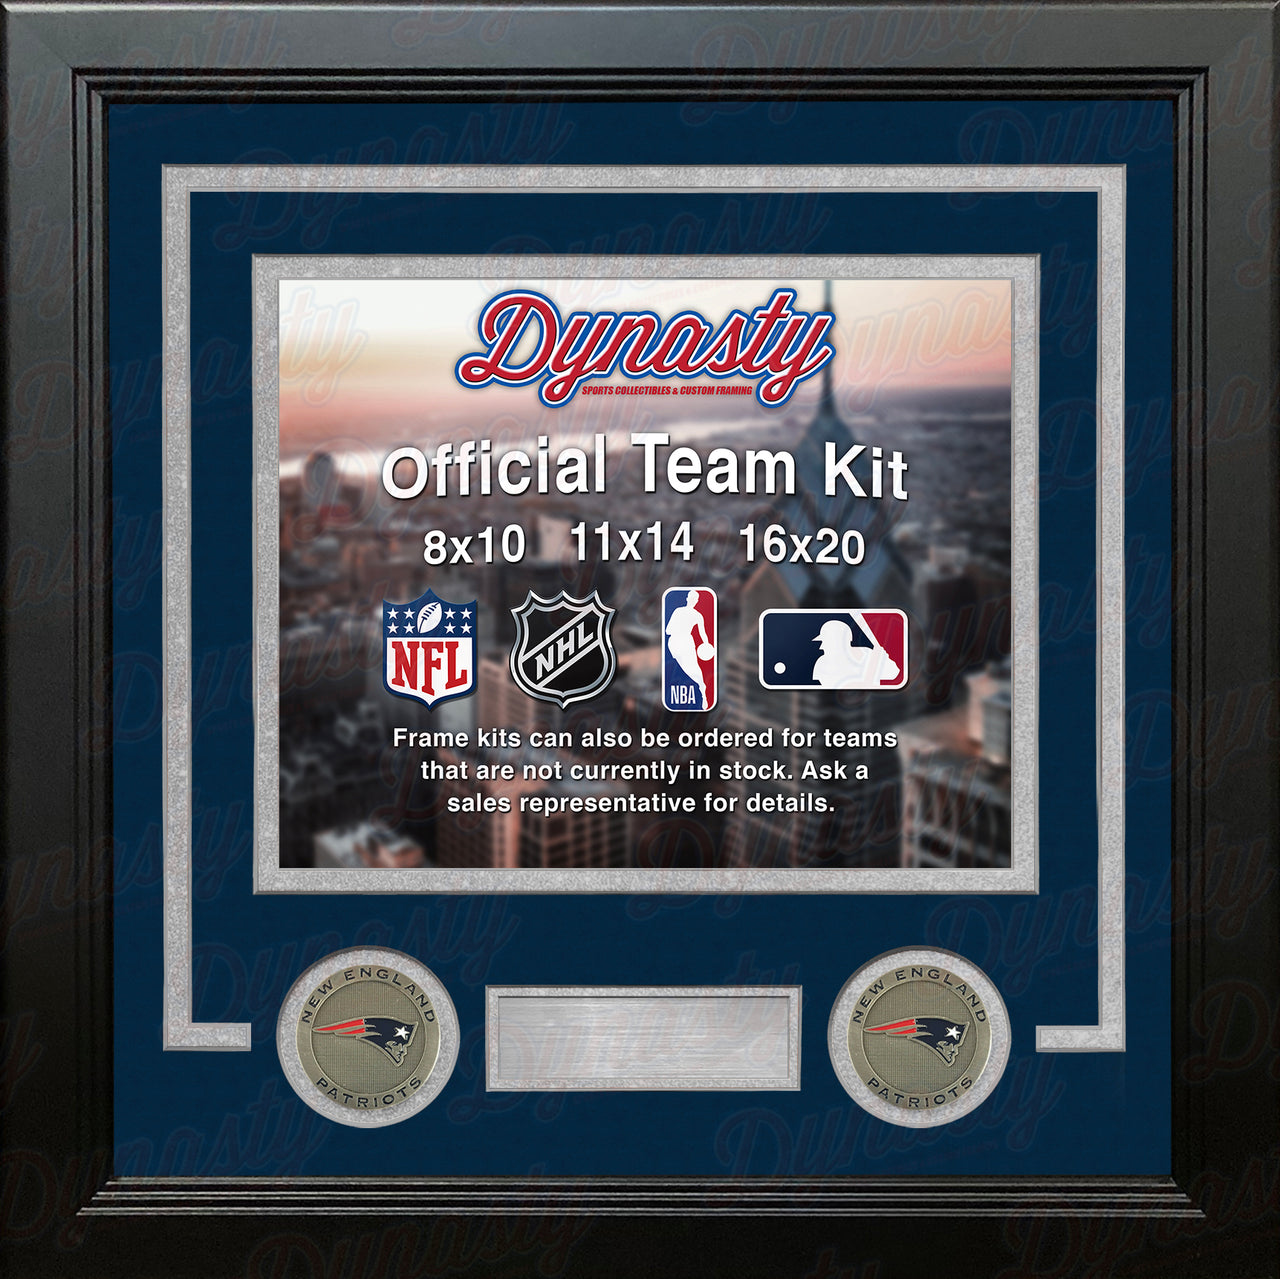 NFL Football Photo Picture Frame Kit - New England Patriots (Navy Matting, Silver Trim) - Dynasty Sports & Framing 